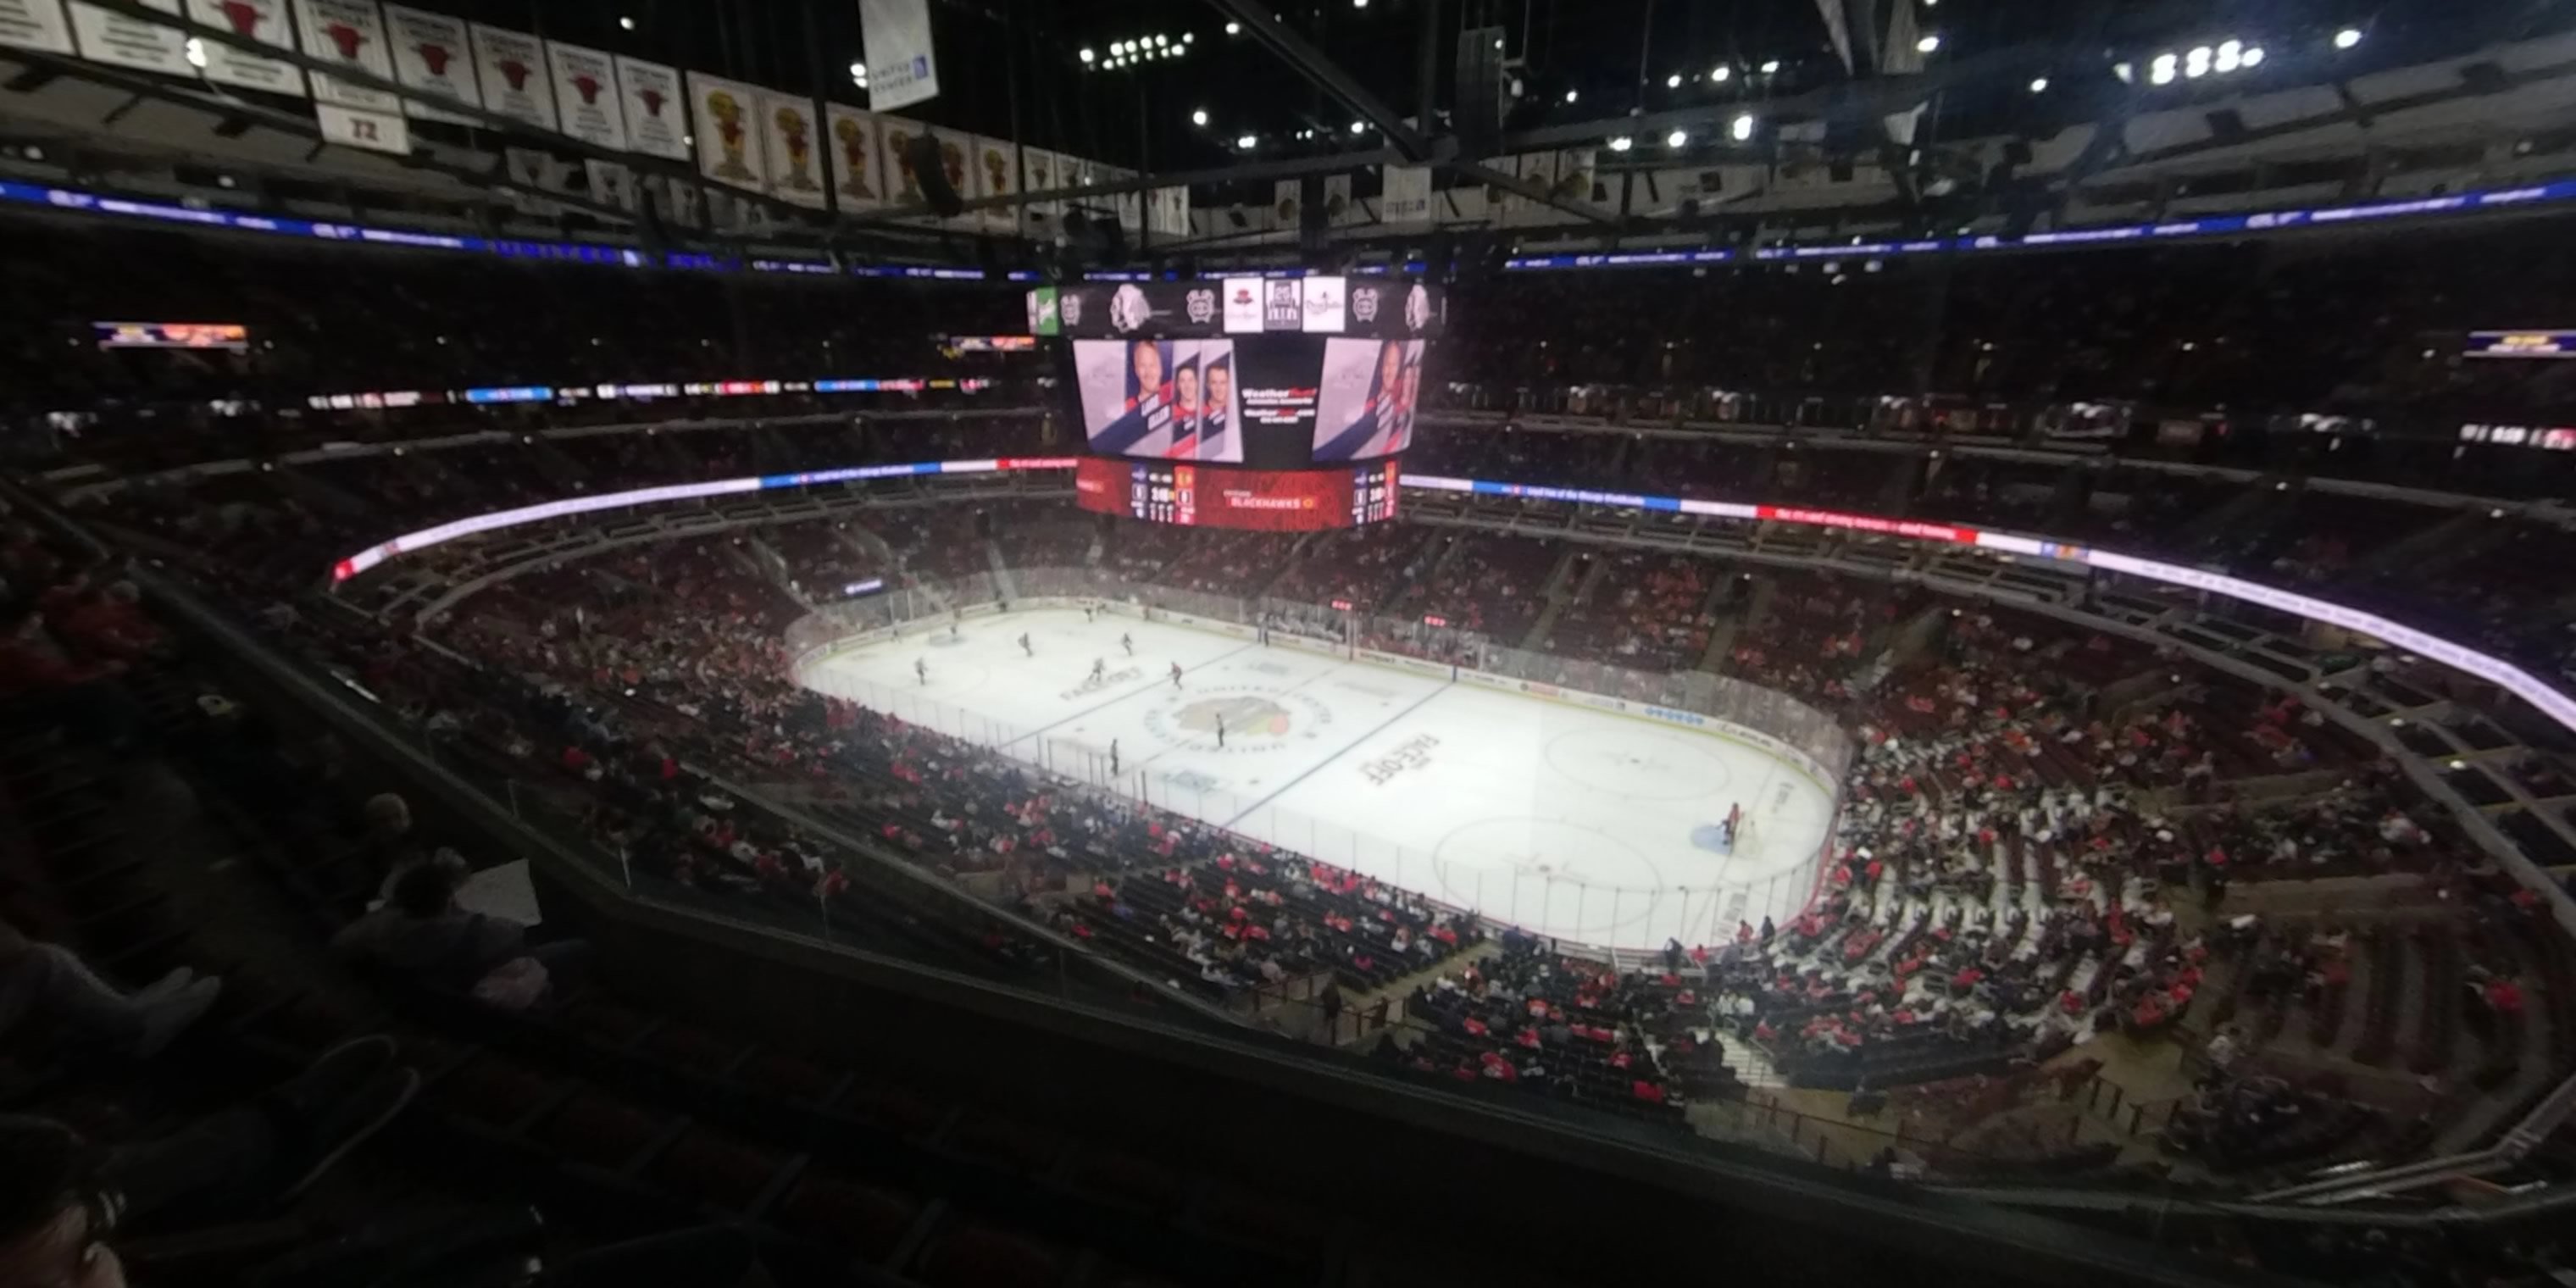 United Center, Bulls and Blackhawks Draft High-Tech Wizards at